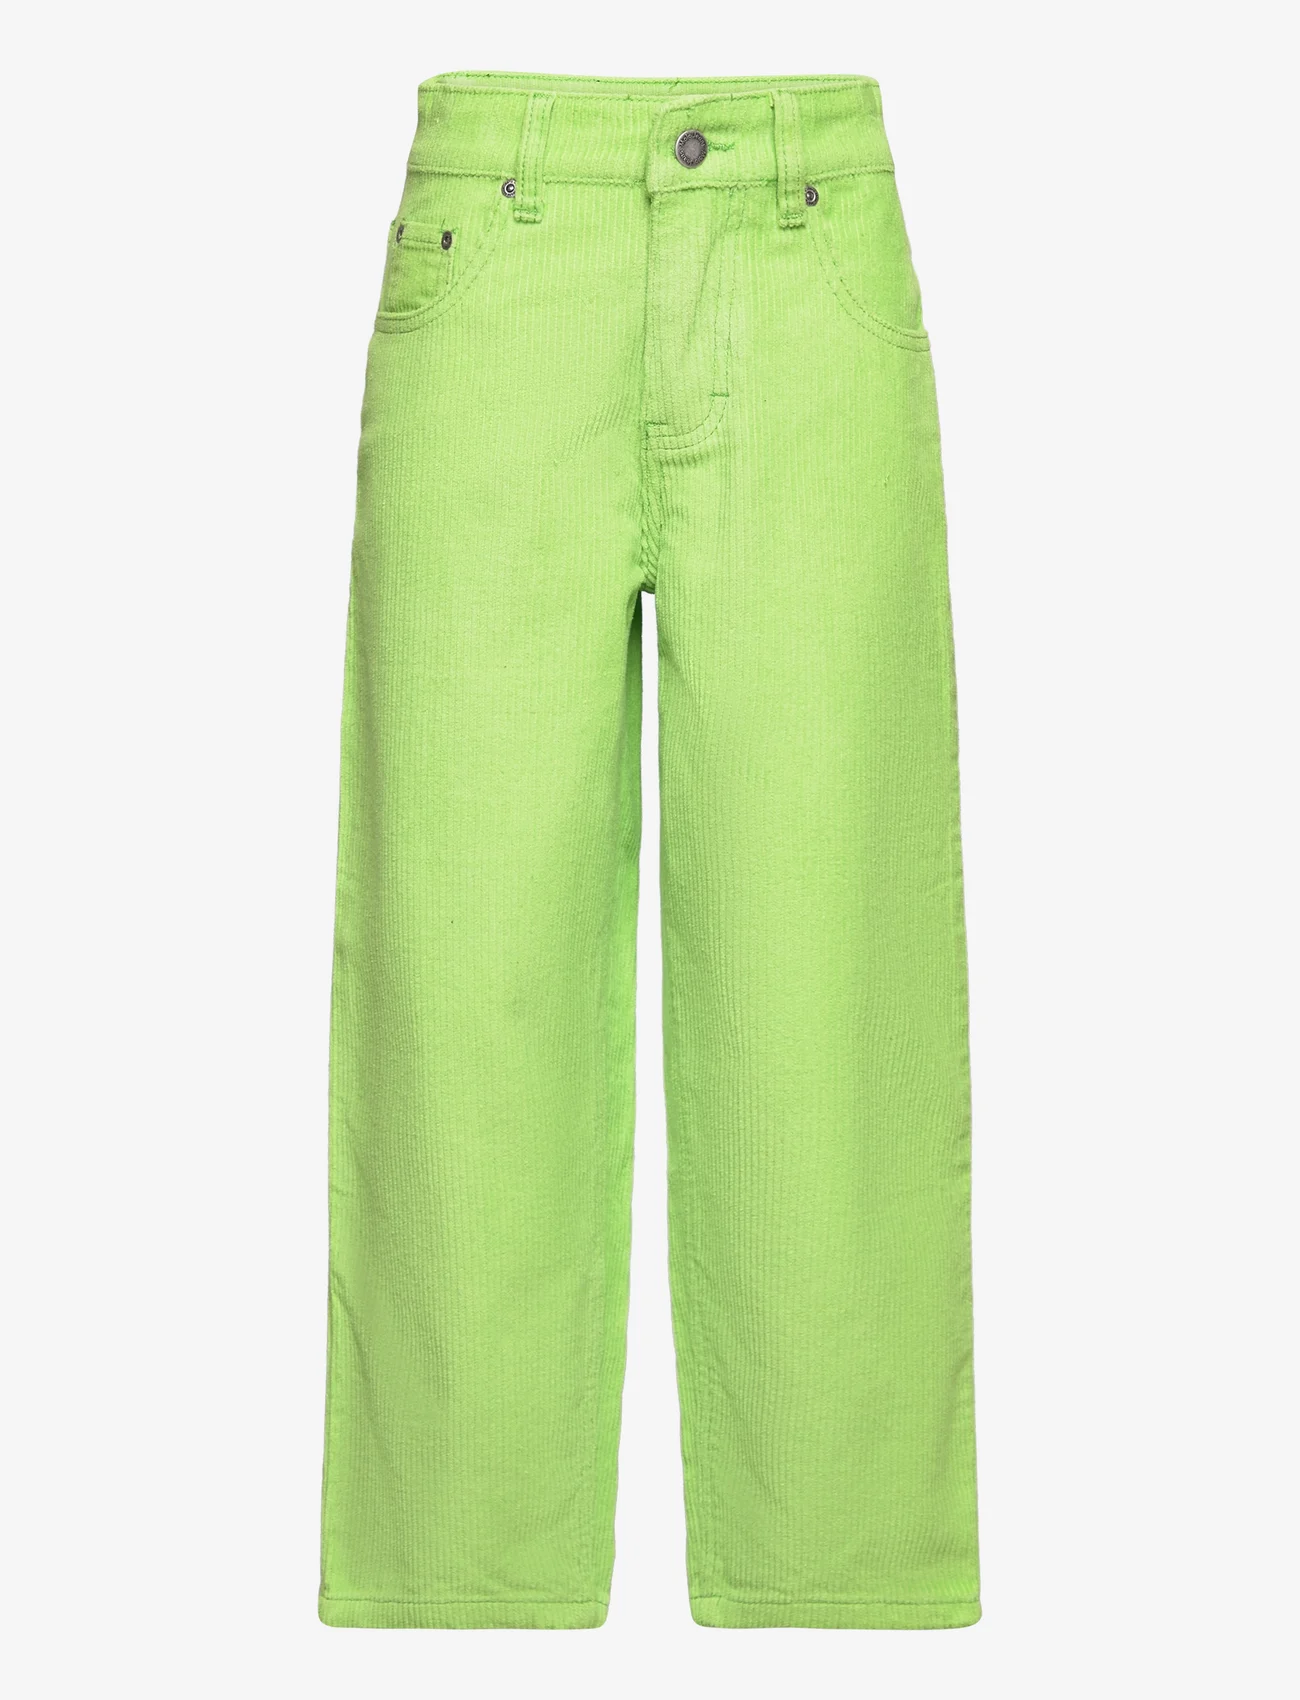 Molo - Aiden - brede jeans - glowing green - 0